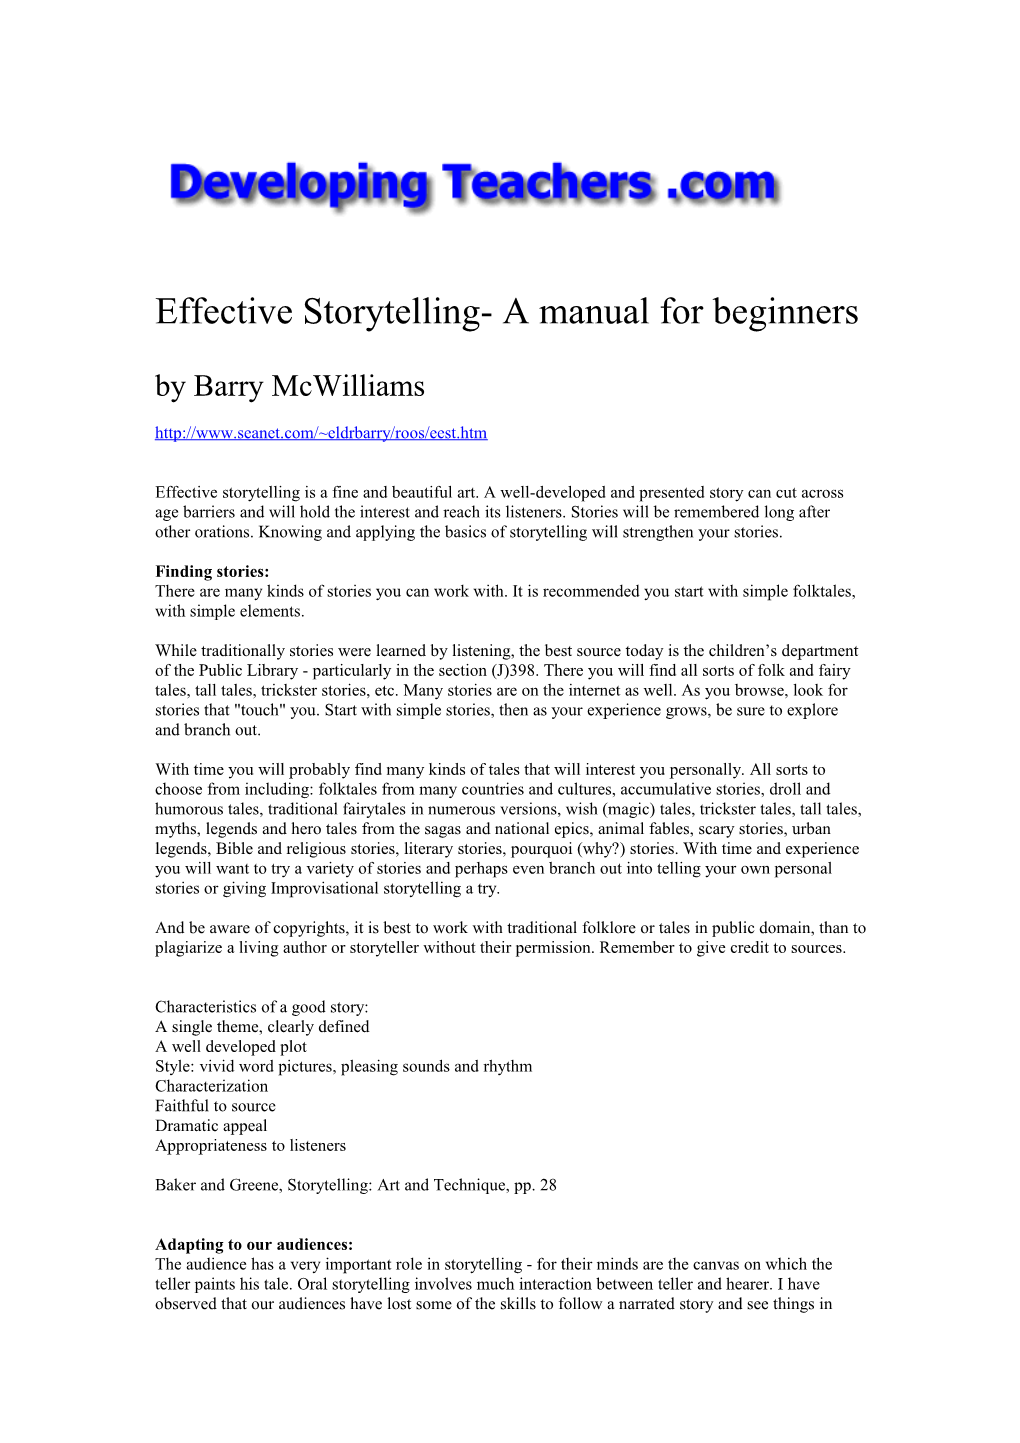 Effective Storytelling- a Manual for Beginners